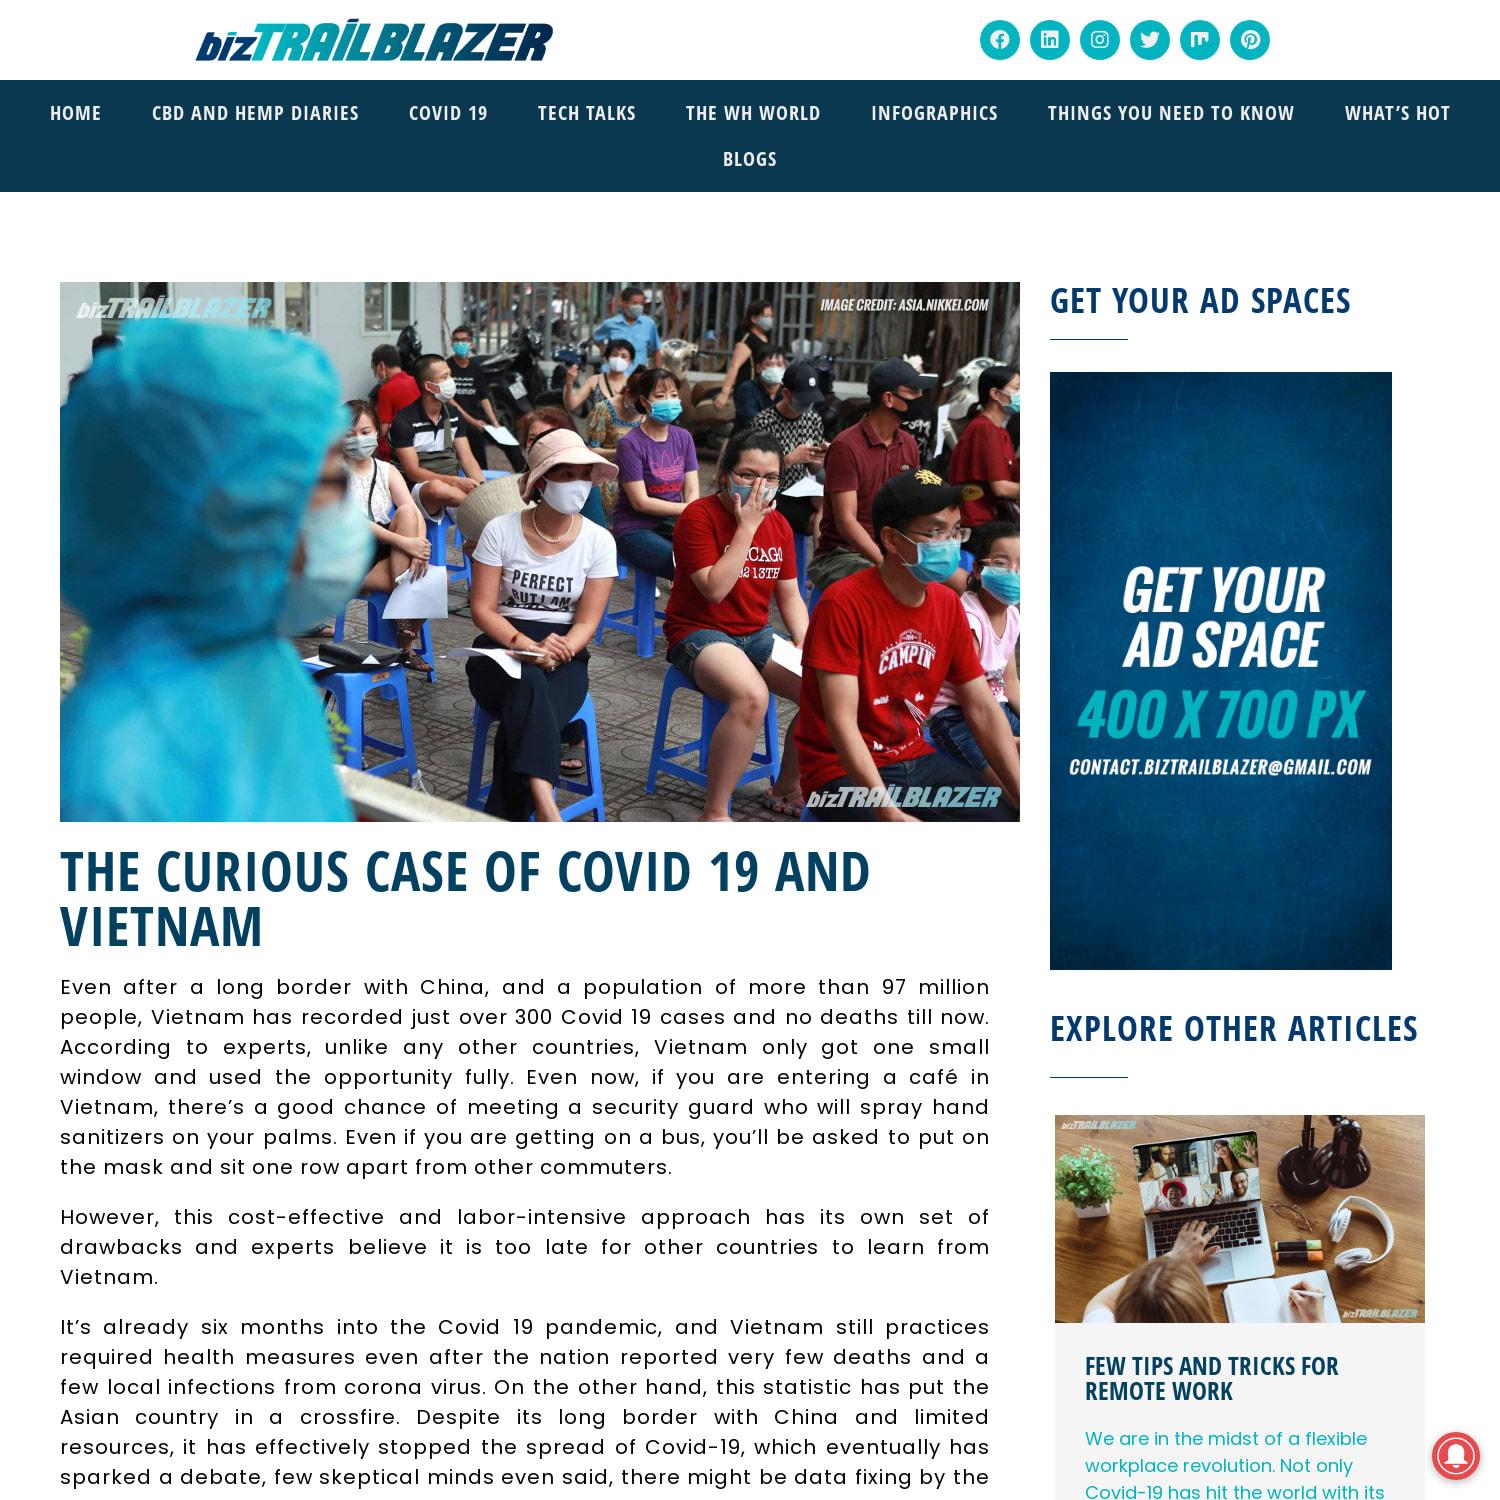 The Curious Case of Covid 19 and Vietnam